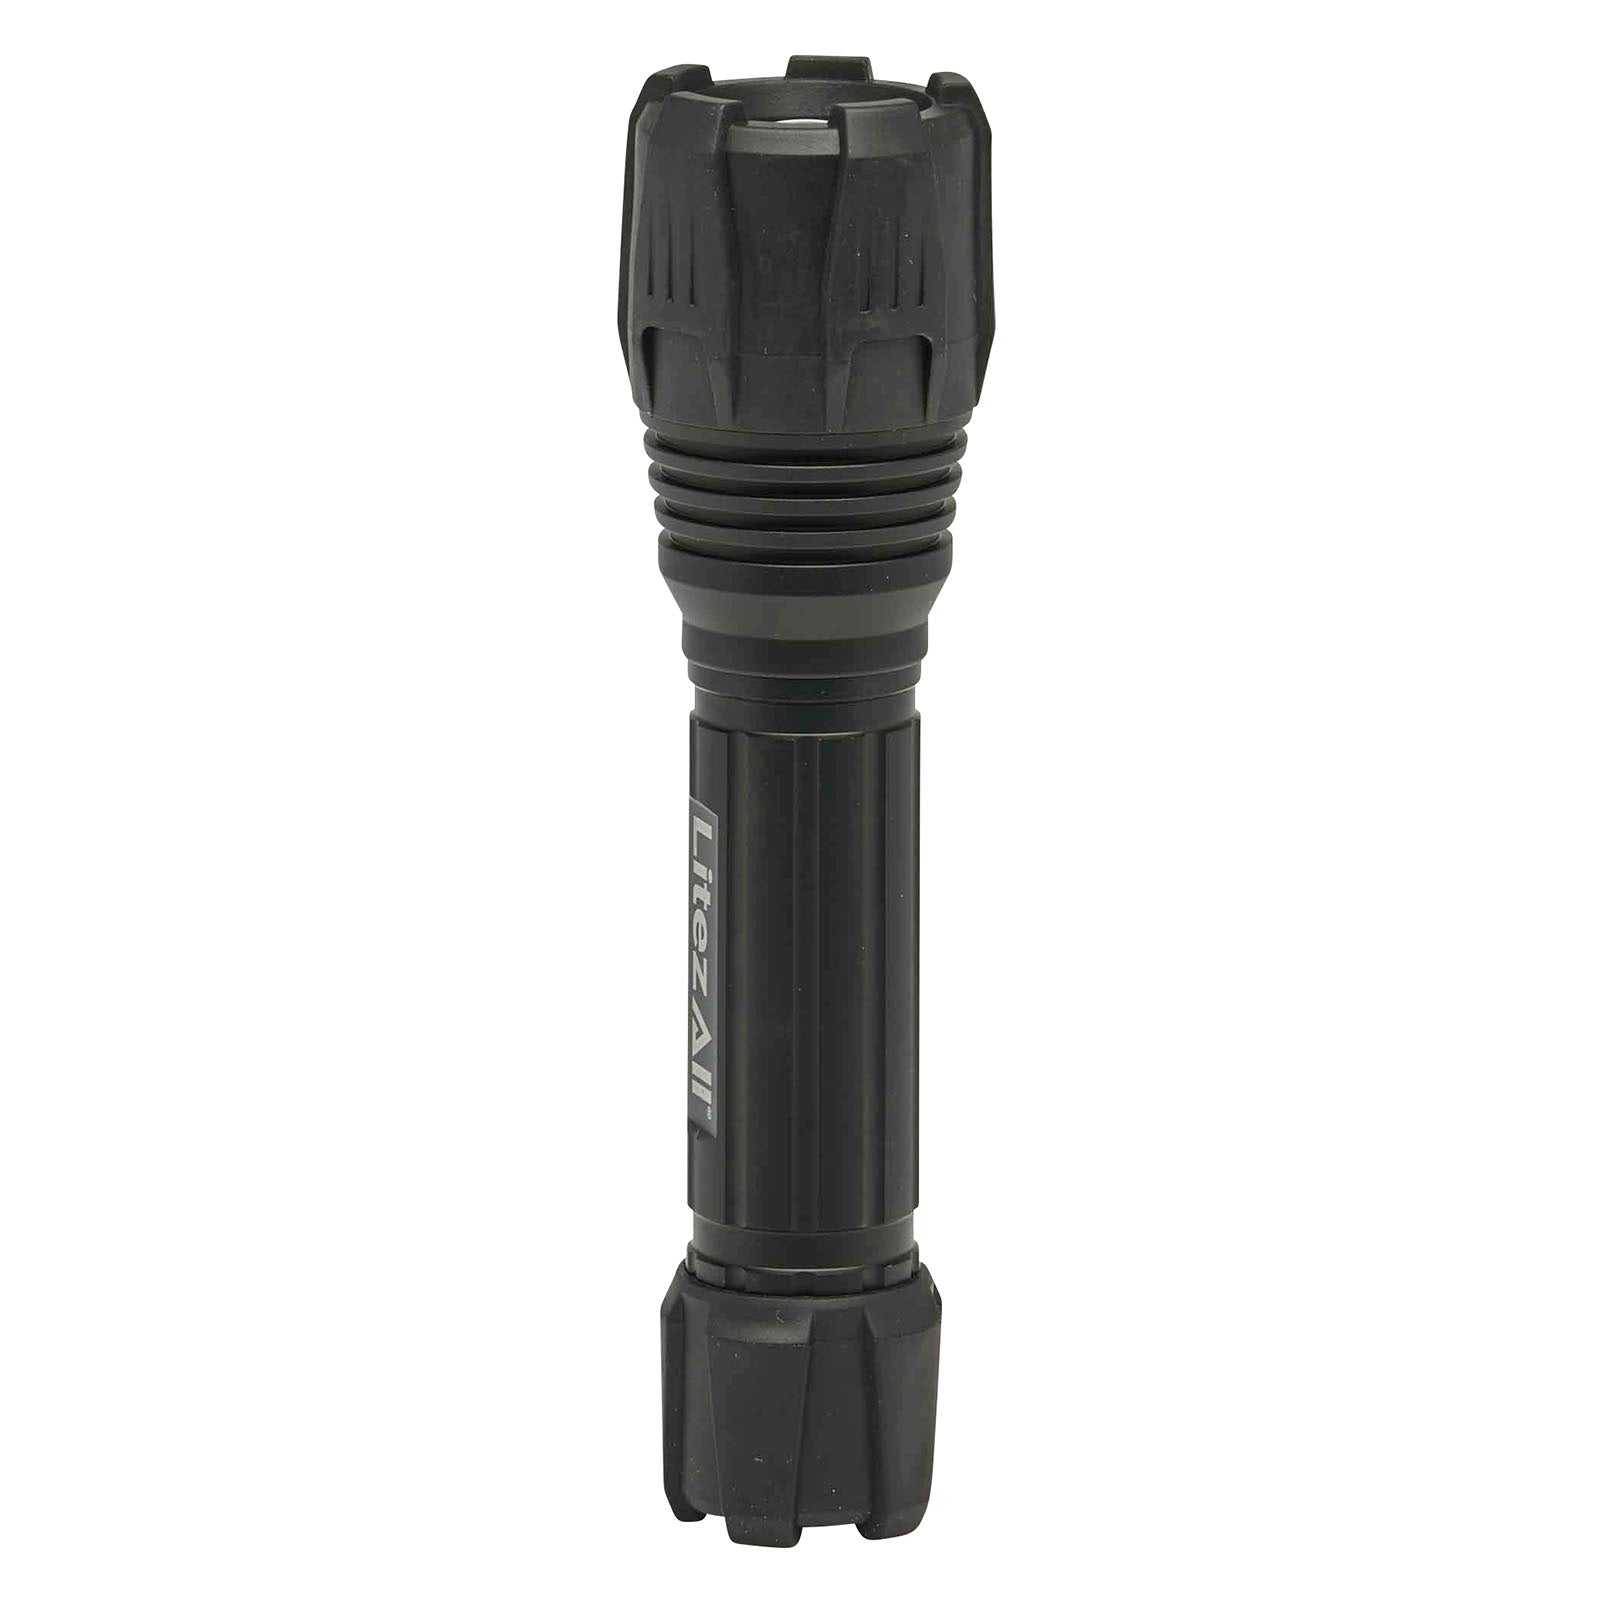 LitezAll Nearly Invincible 1000 Lumen Rechargeable Tactical Flashlight